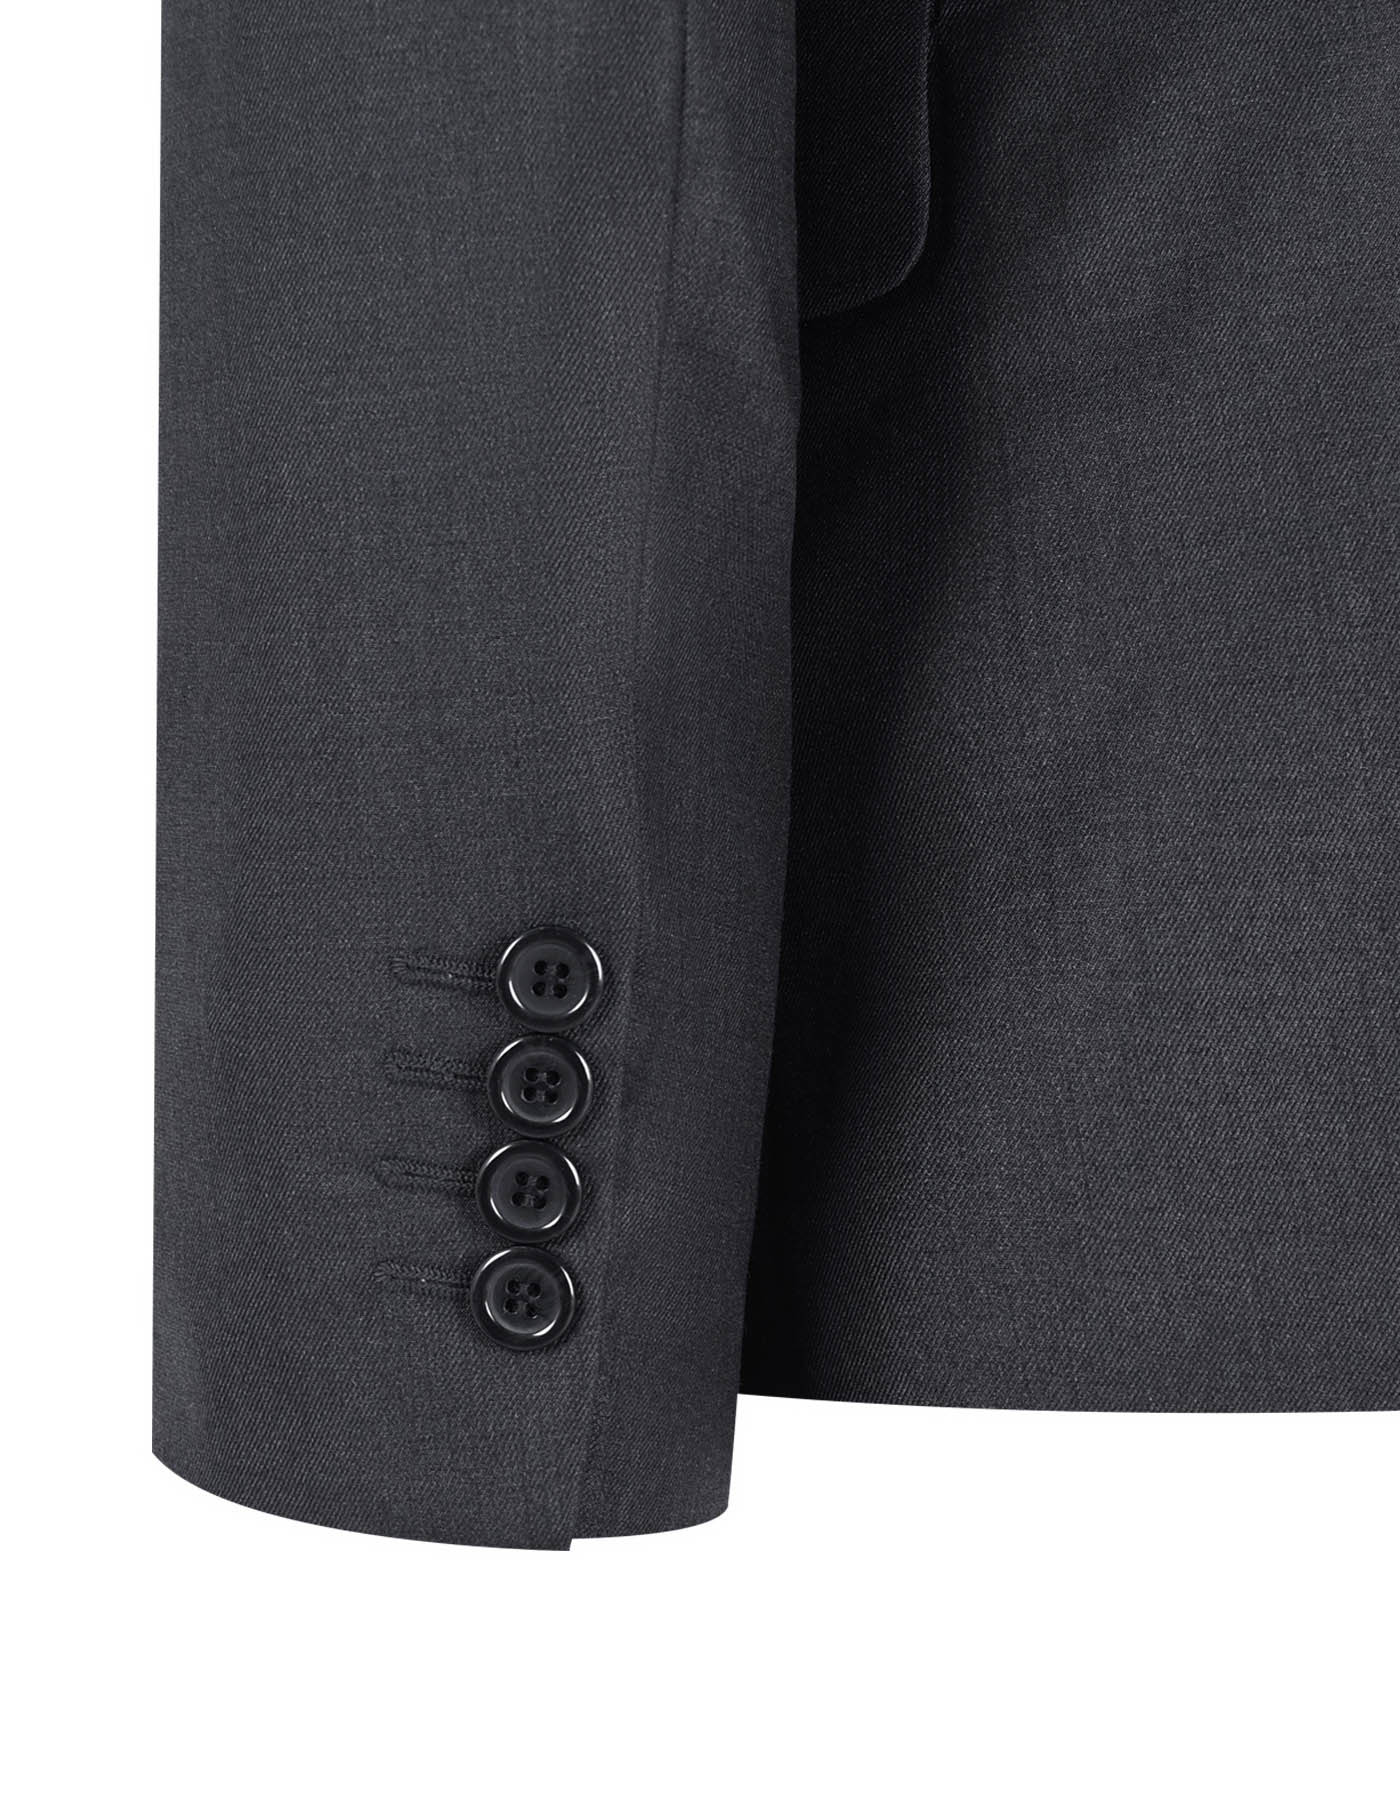 Suit Charcoal ST1115C Uniworth Double Breasted